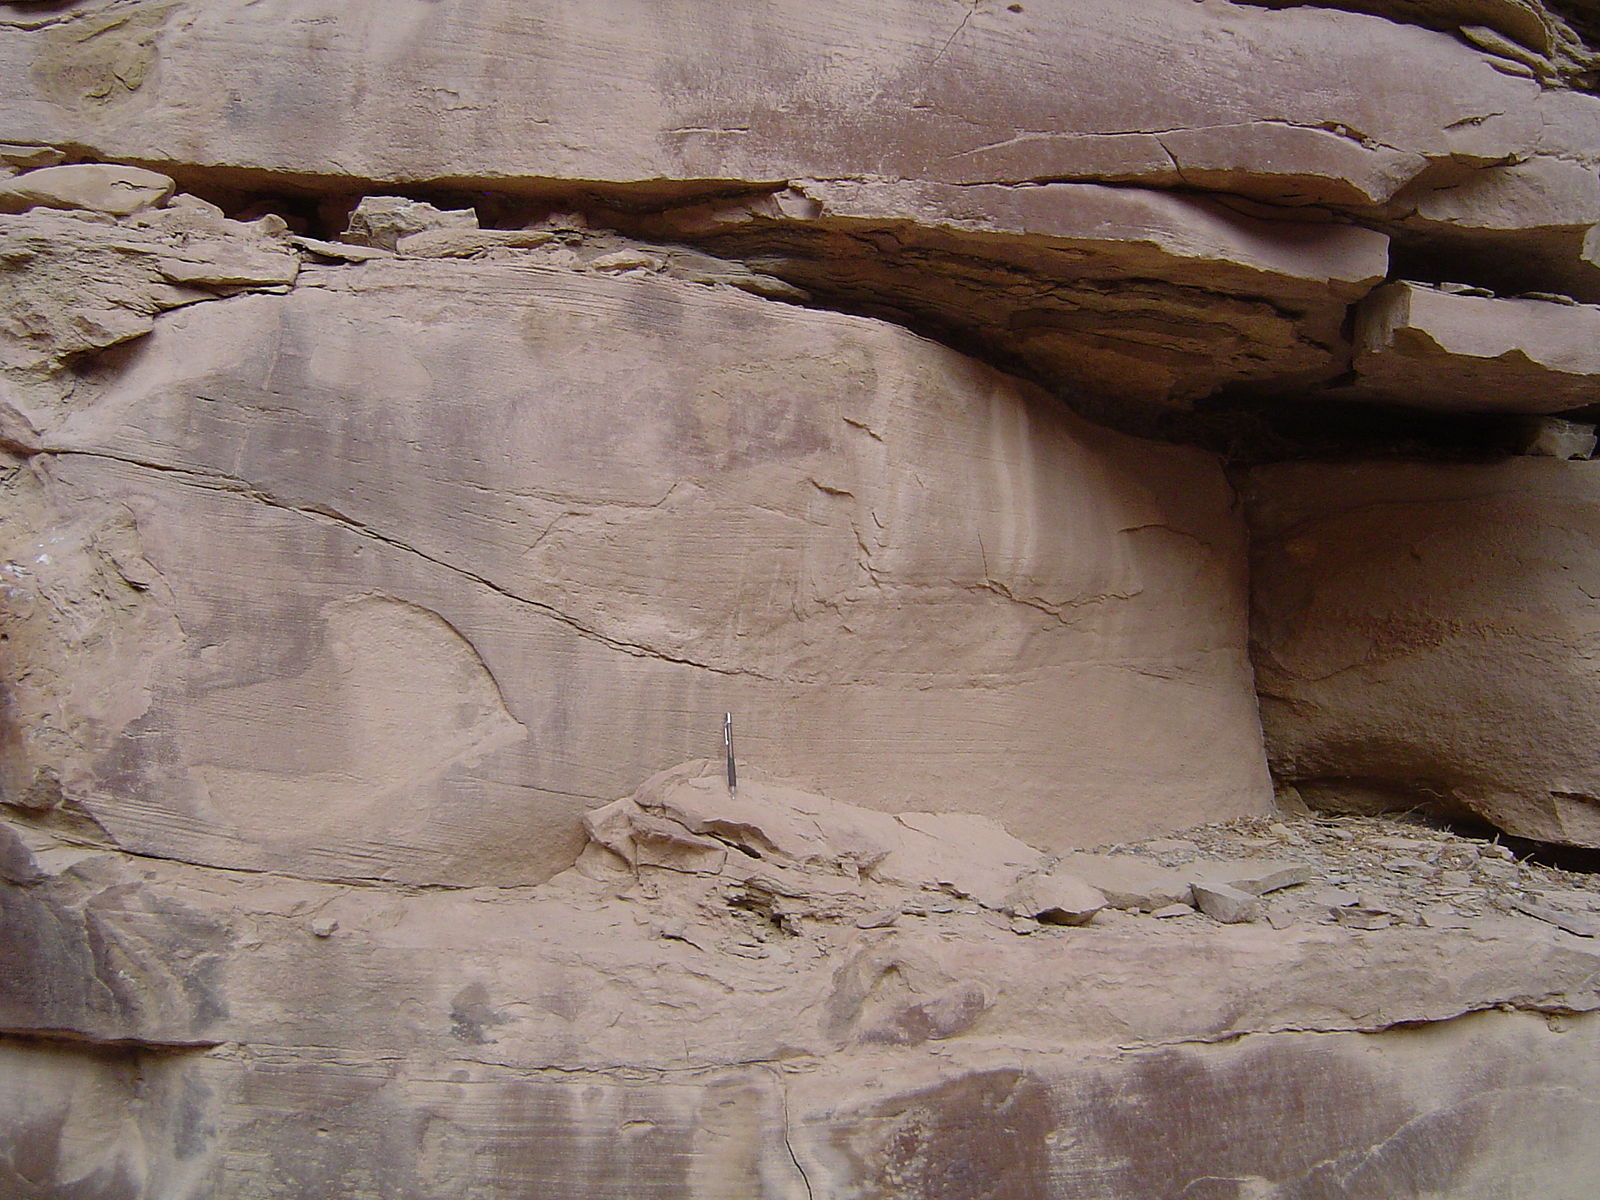 Tan rock with visible bumpy and undulating lines in the rock; a pencil rests vertically against the rock face for scale.